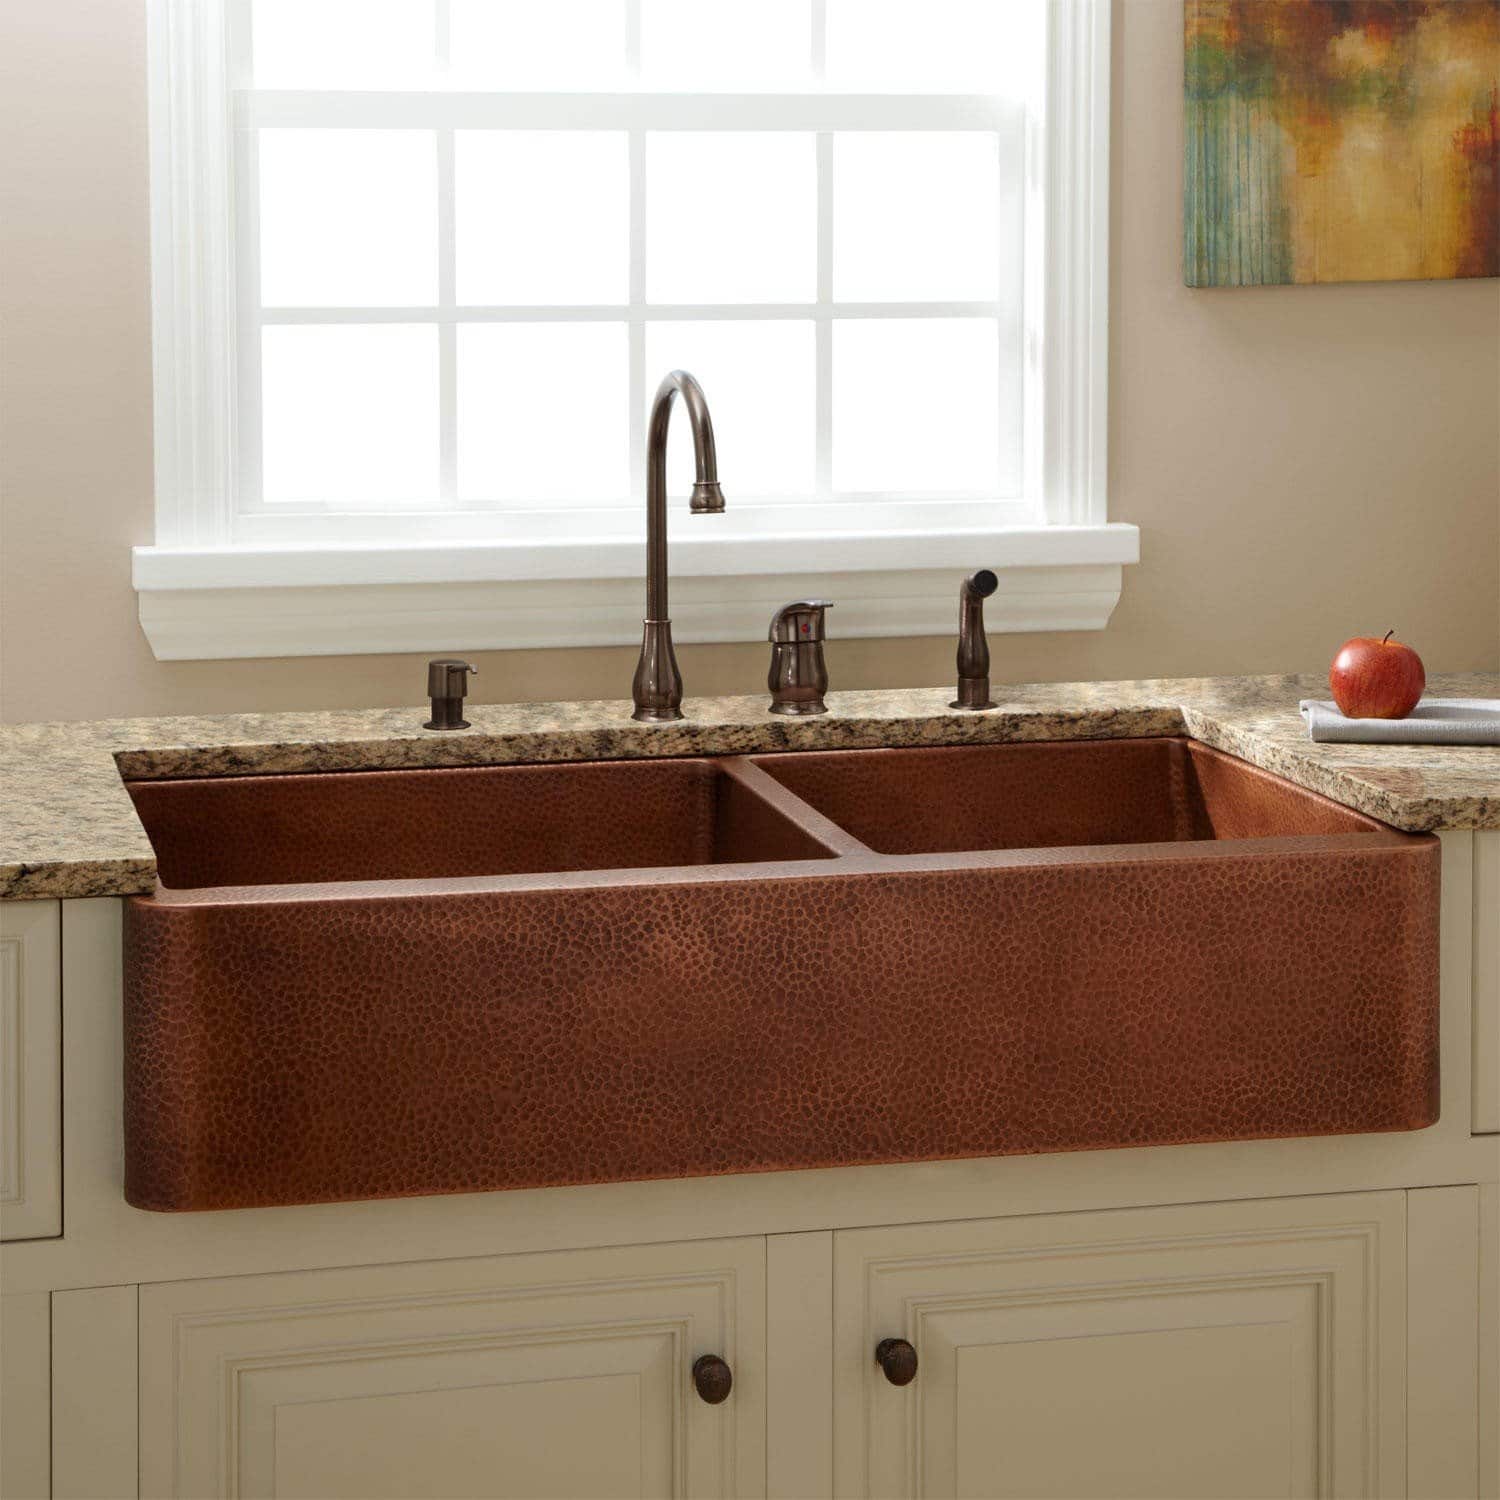 Farmhouse Kitchen Sink Classic With Picture Of Farmhouse Kitchen Property Fresh At Gallery 